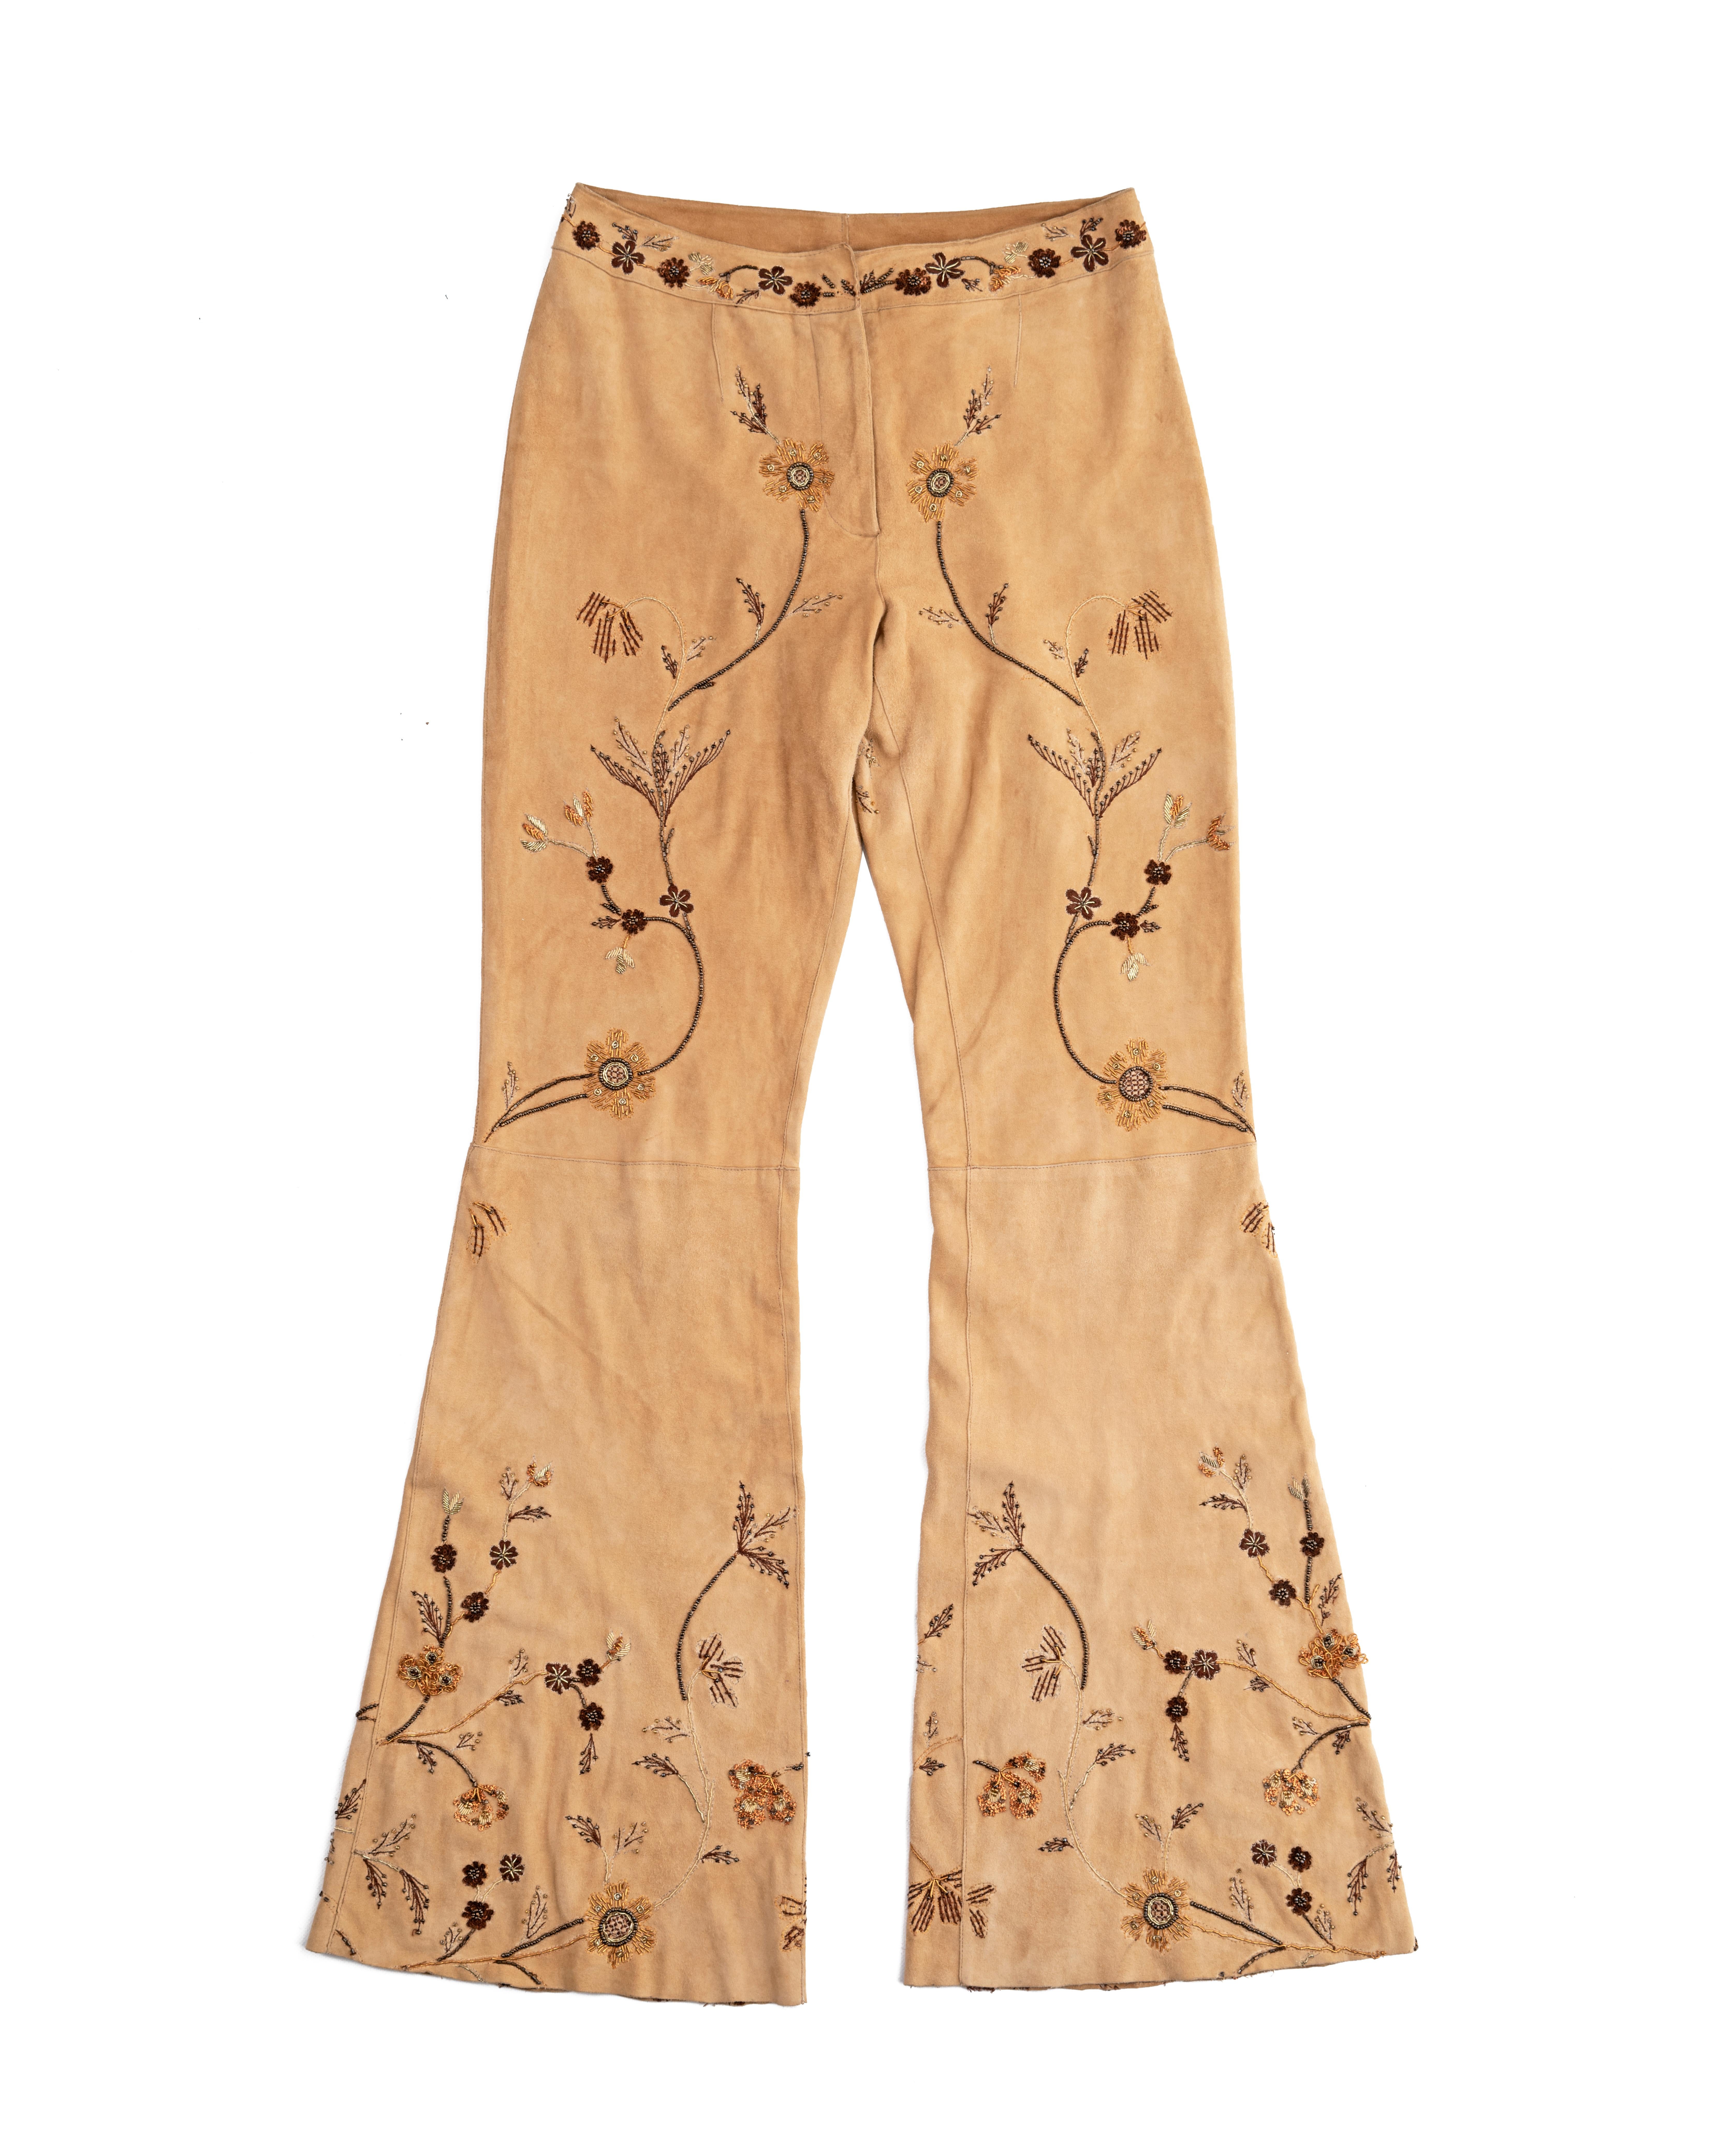 ▪ Dolce & Gabbana cream goat suede flared pants 
▪ Sold by One of a Kind Archive
▪ Spring-Summer 2001
▪ Floral embroidery 
▪ Animal-print lining 
▪ IT 38 - FR 34 - UK 6 - US 2
▪ Made in Italy

All photographs in this listing EXCLUDING any reference